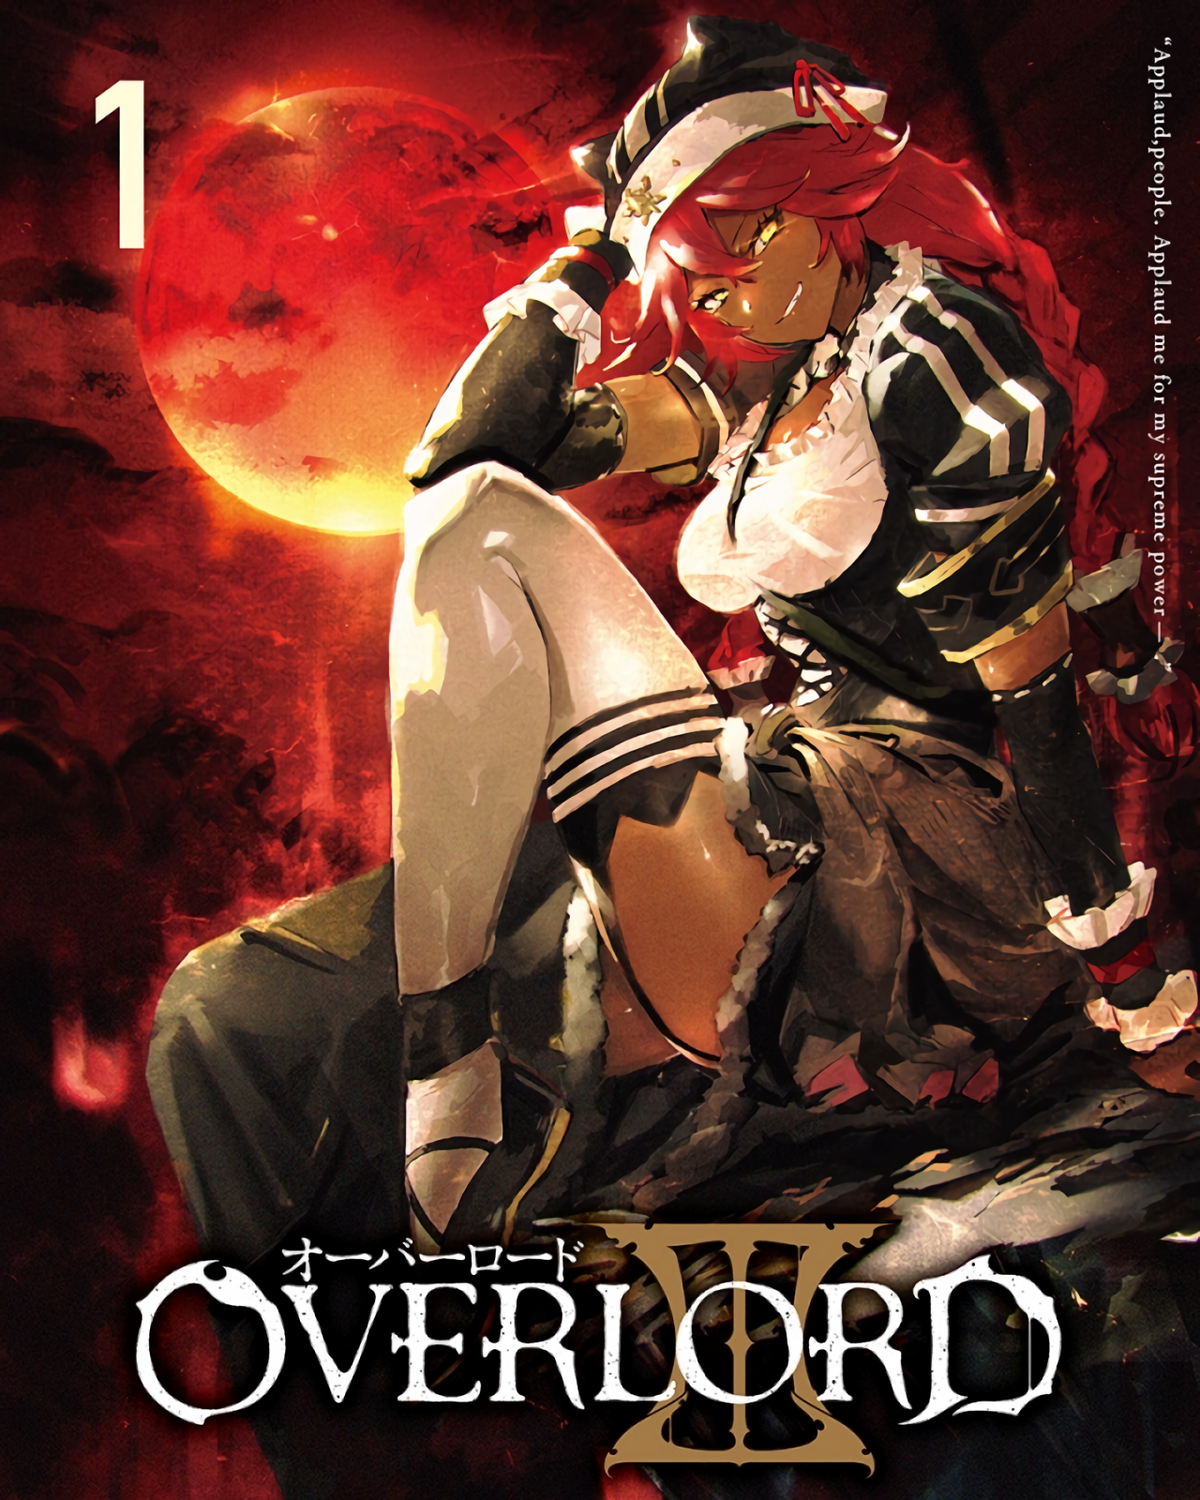 Overlord - Overlord III DVD/Blu-ray Cover RIP Gazef under